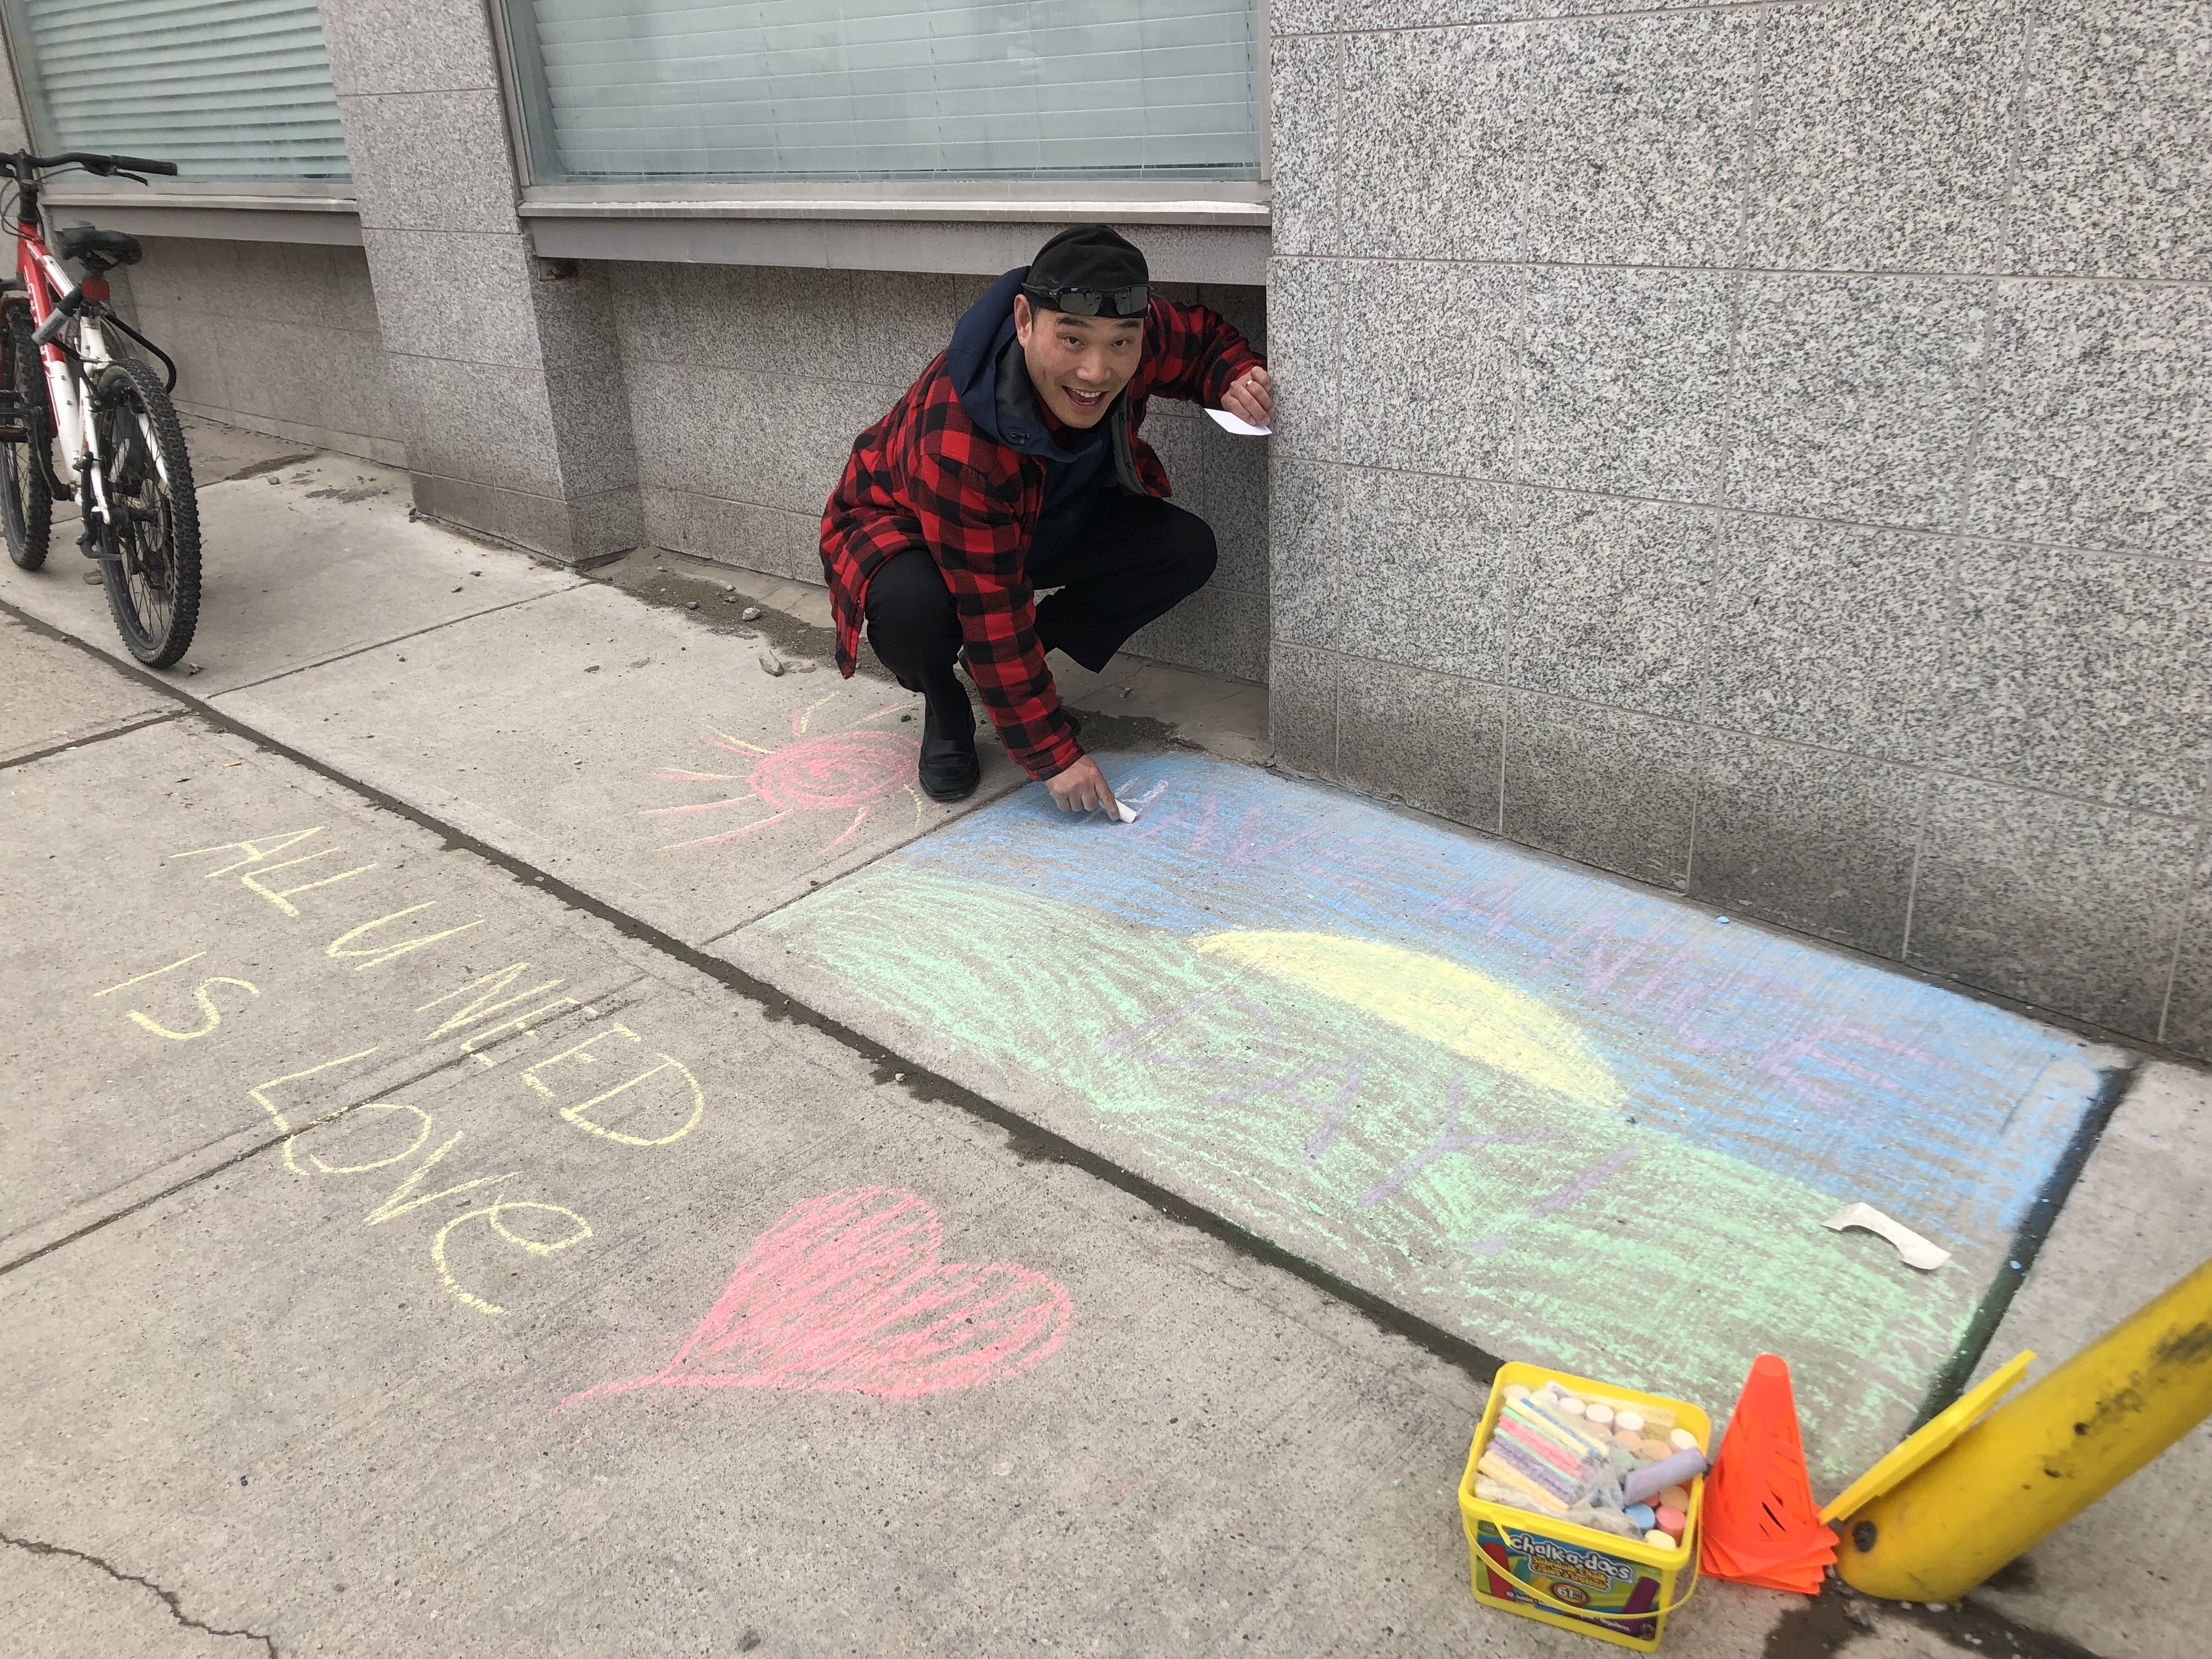 Captain Peter Kim uses sidewalk chalk as a tool to engage community.